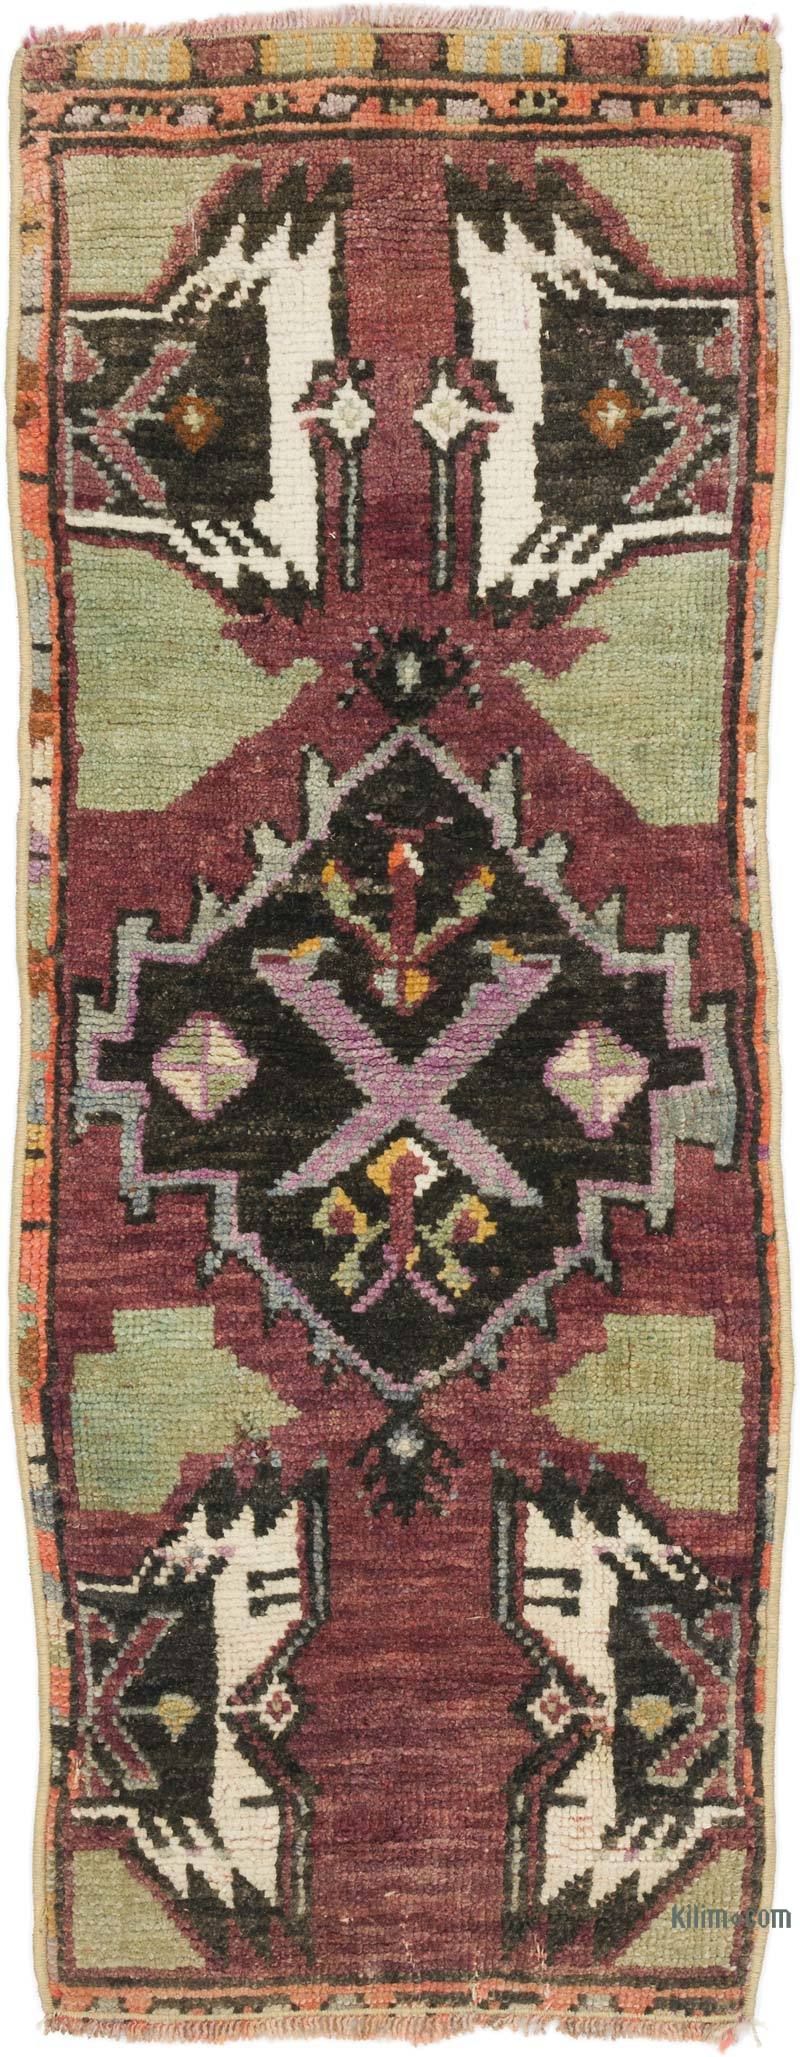 Vintage Turkish Hand-Knotted Rug - 1' 7" x 3' 11" (19 in. x 47 in.) - K0057716